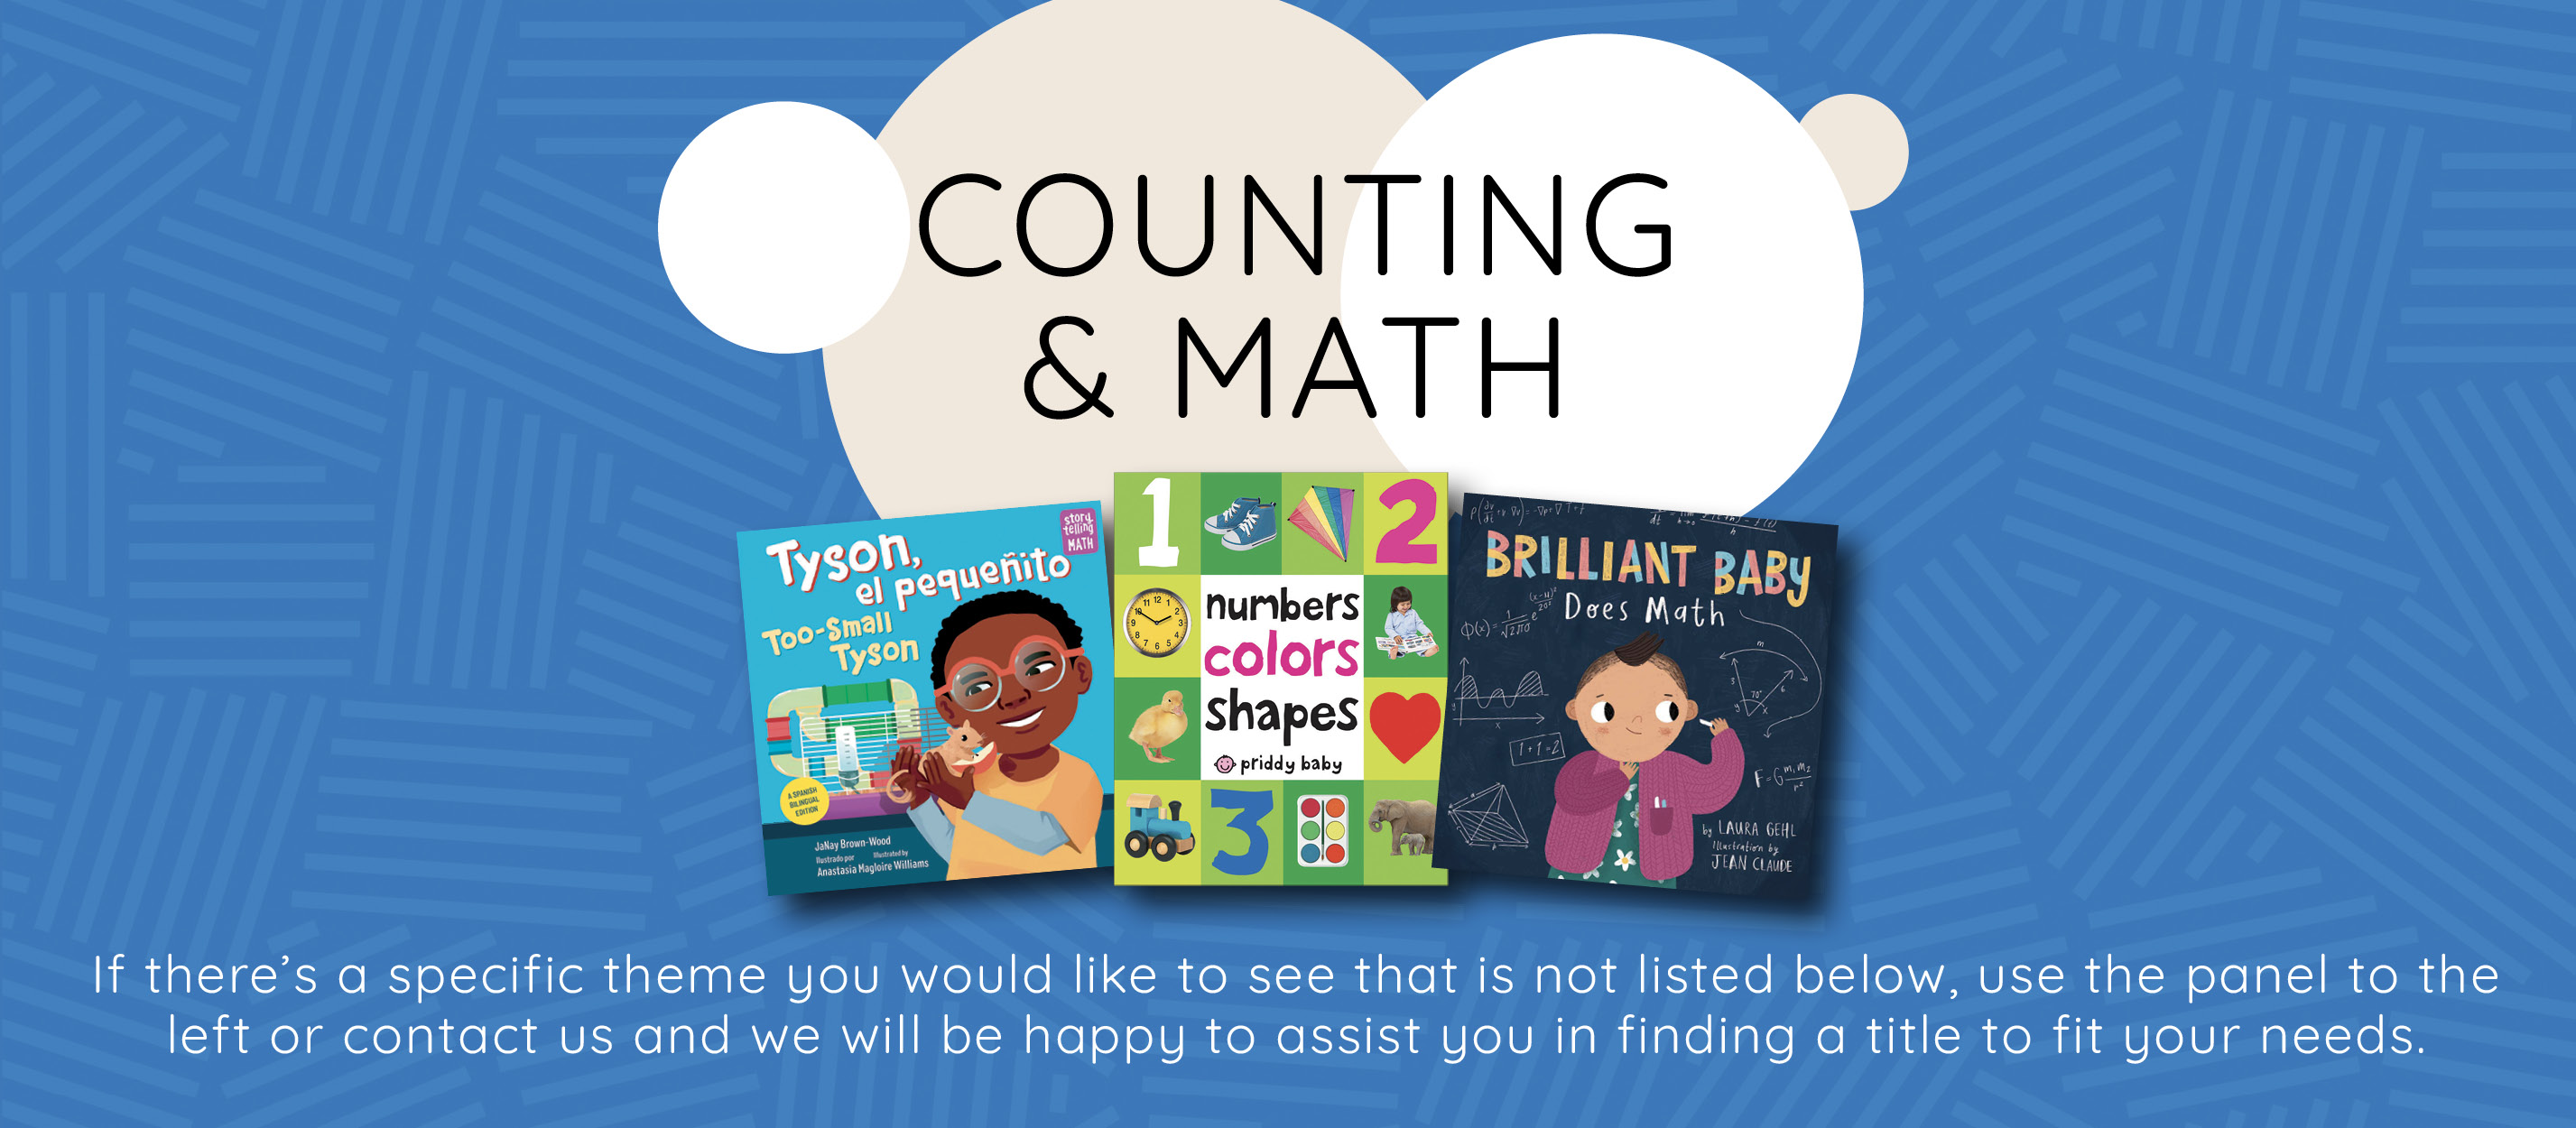 Counting & Math